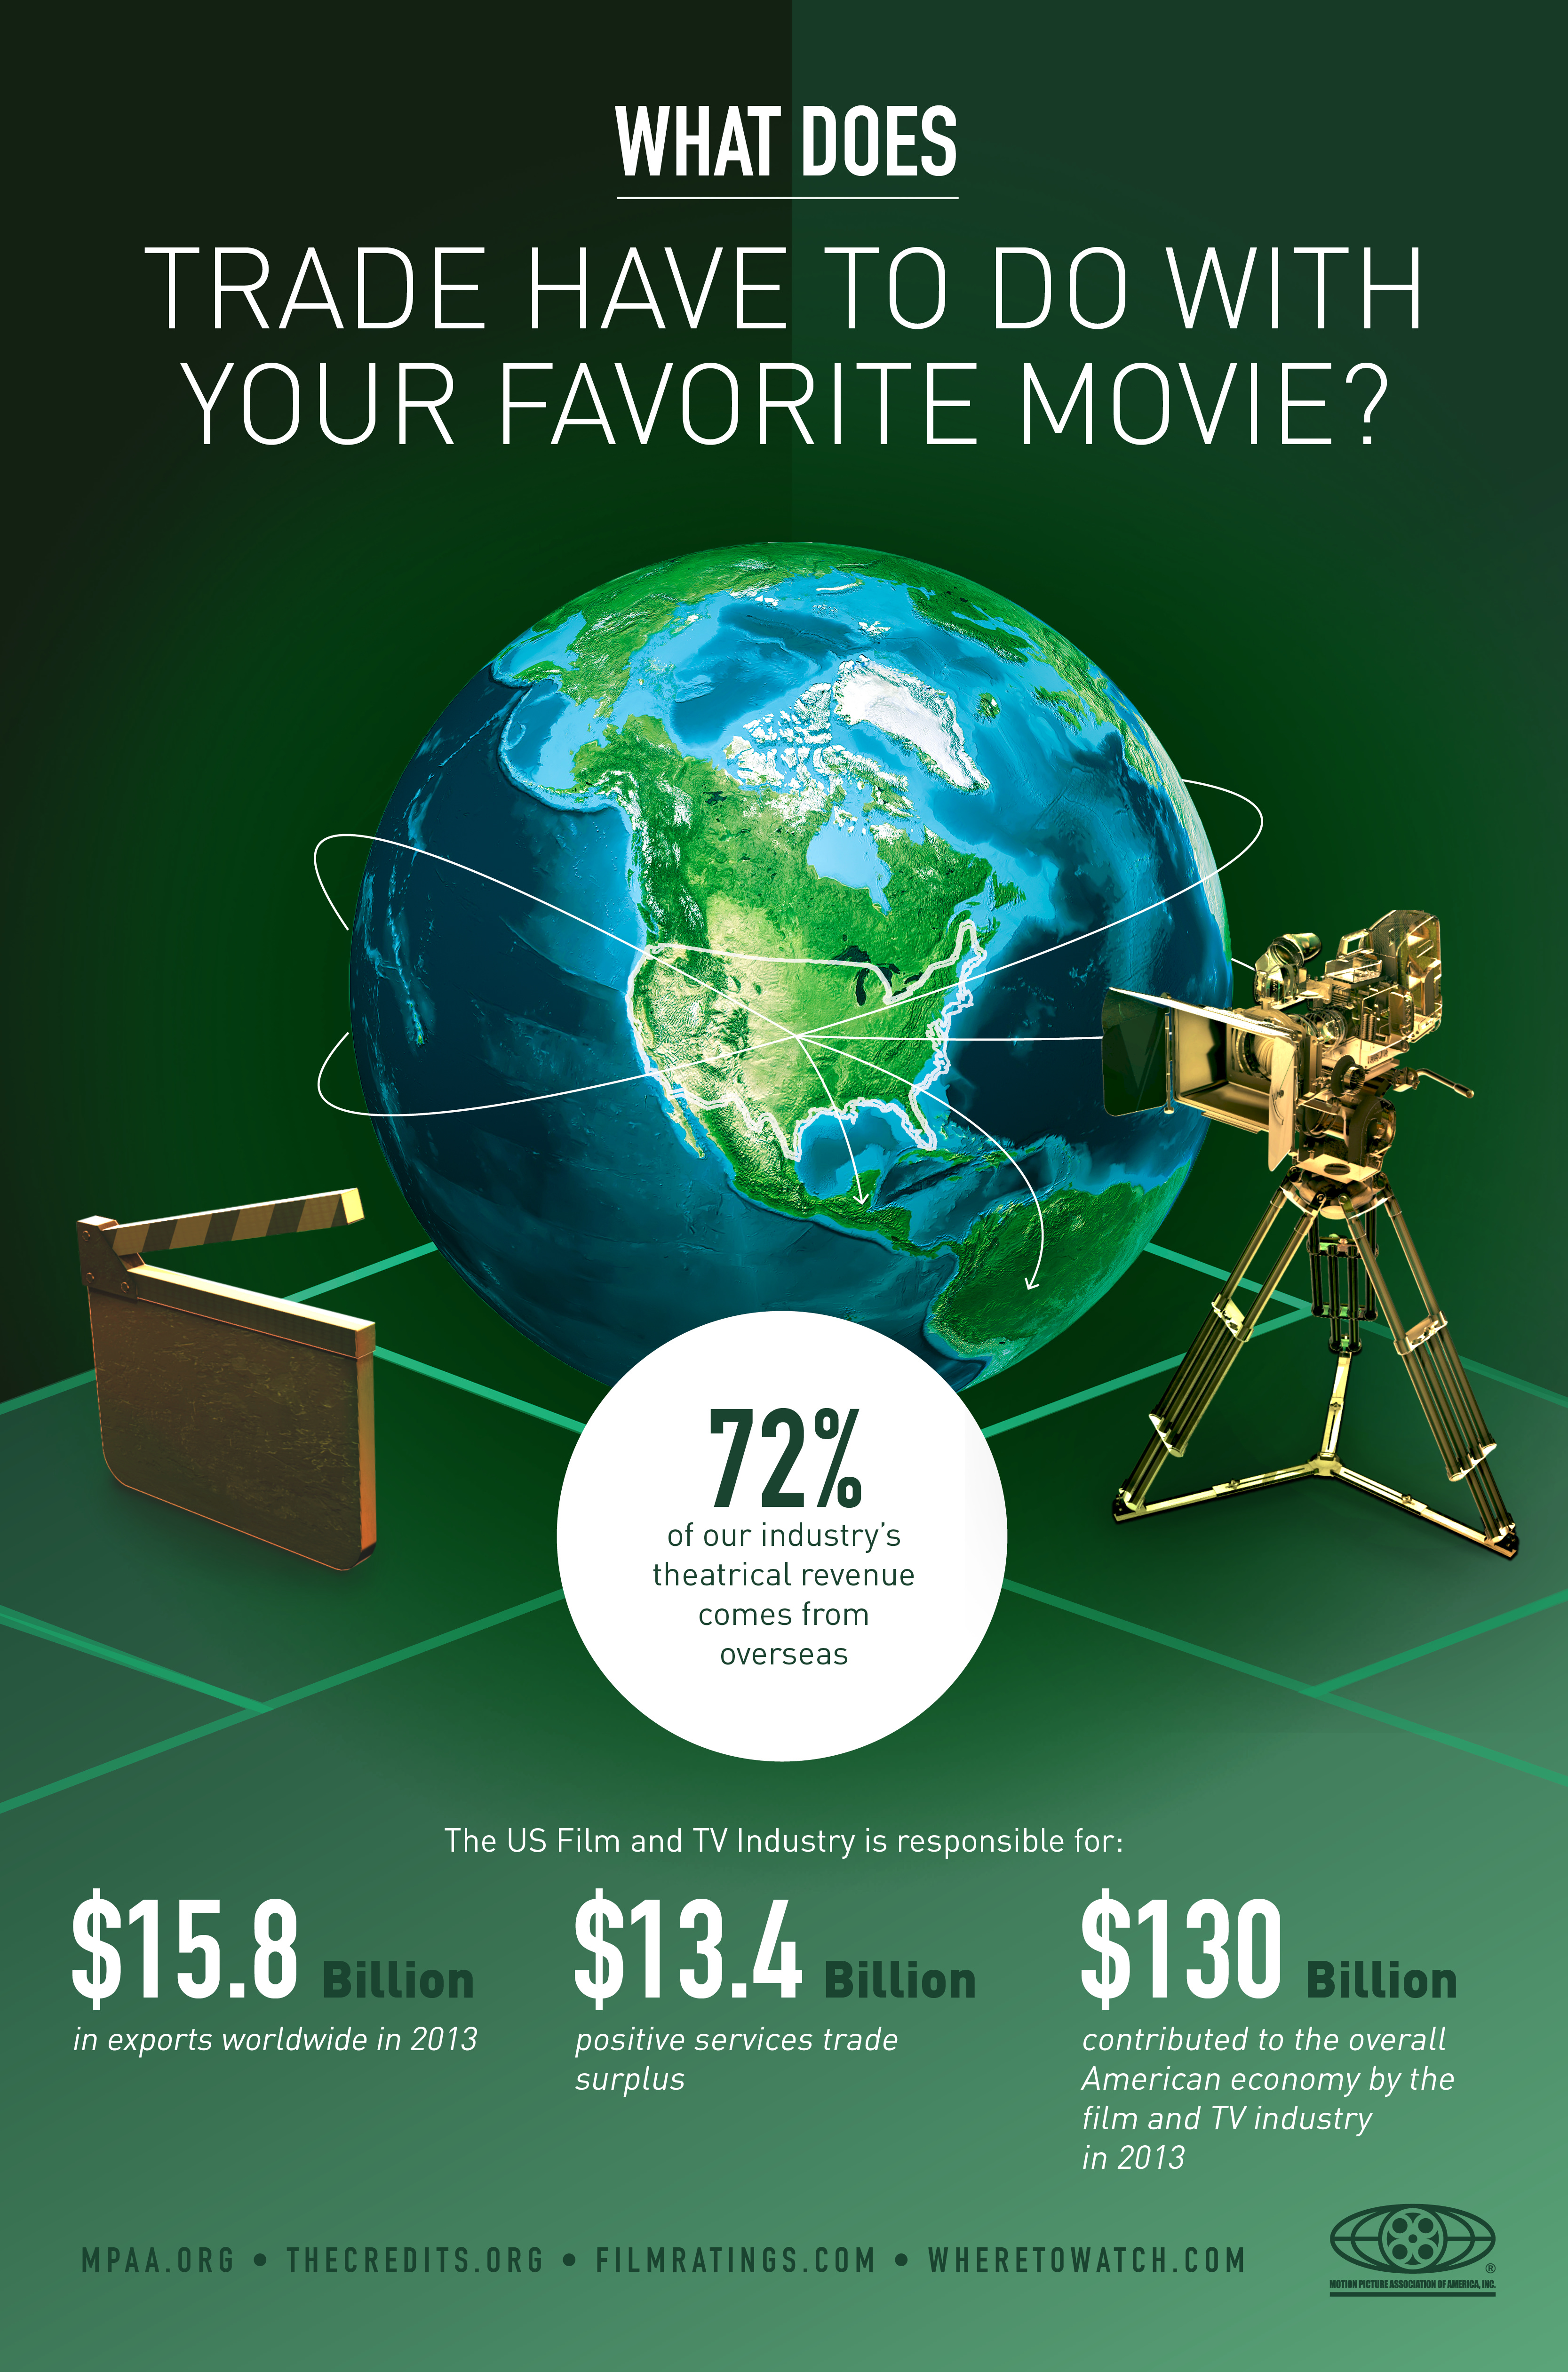 Trade and your favorite movie